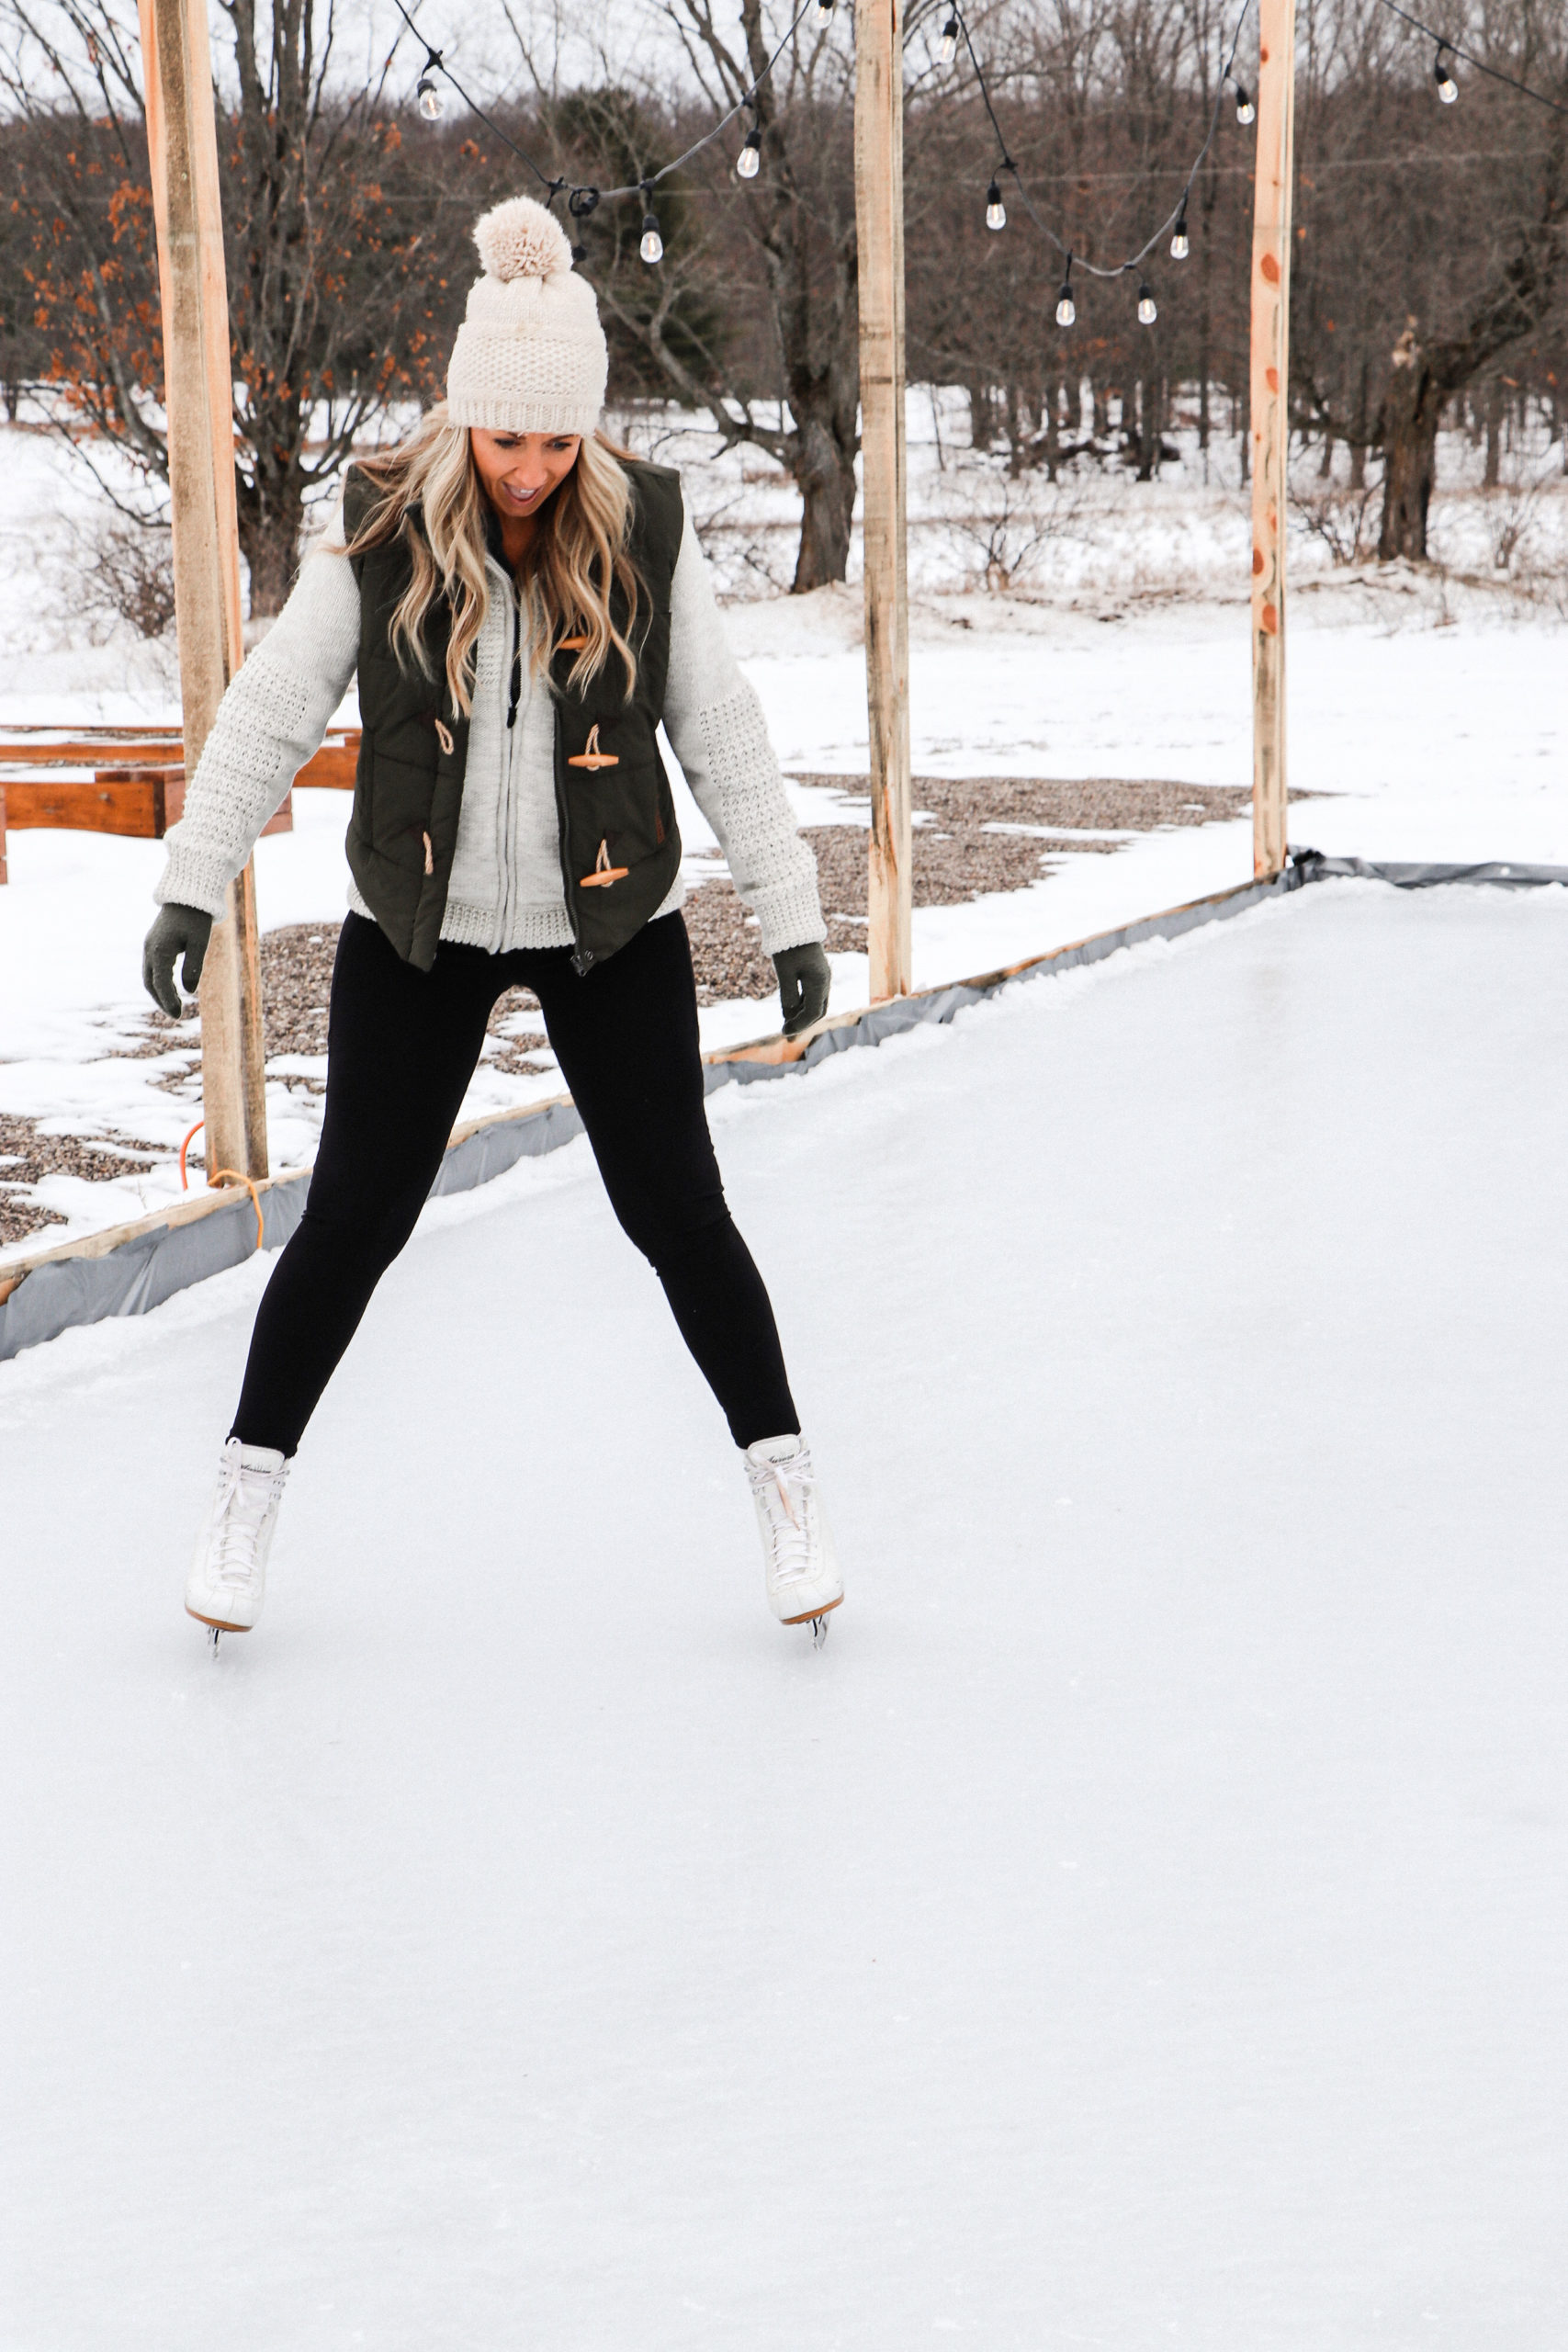 tips for building a DIY Backyard Ice Rink